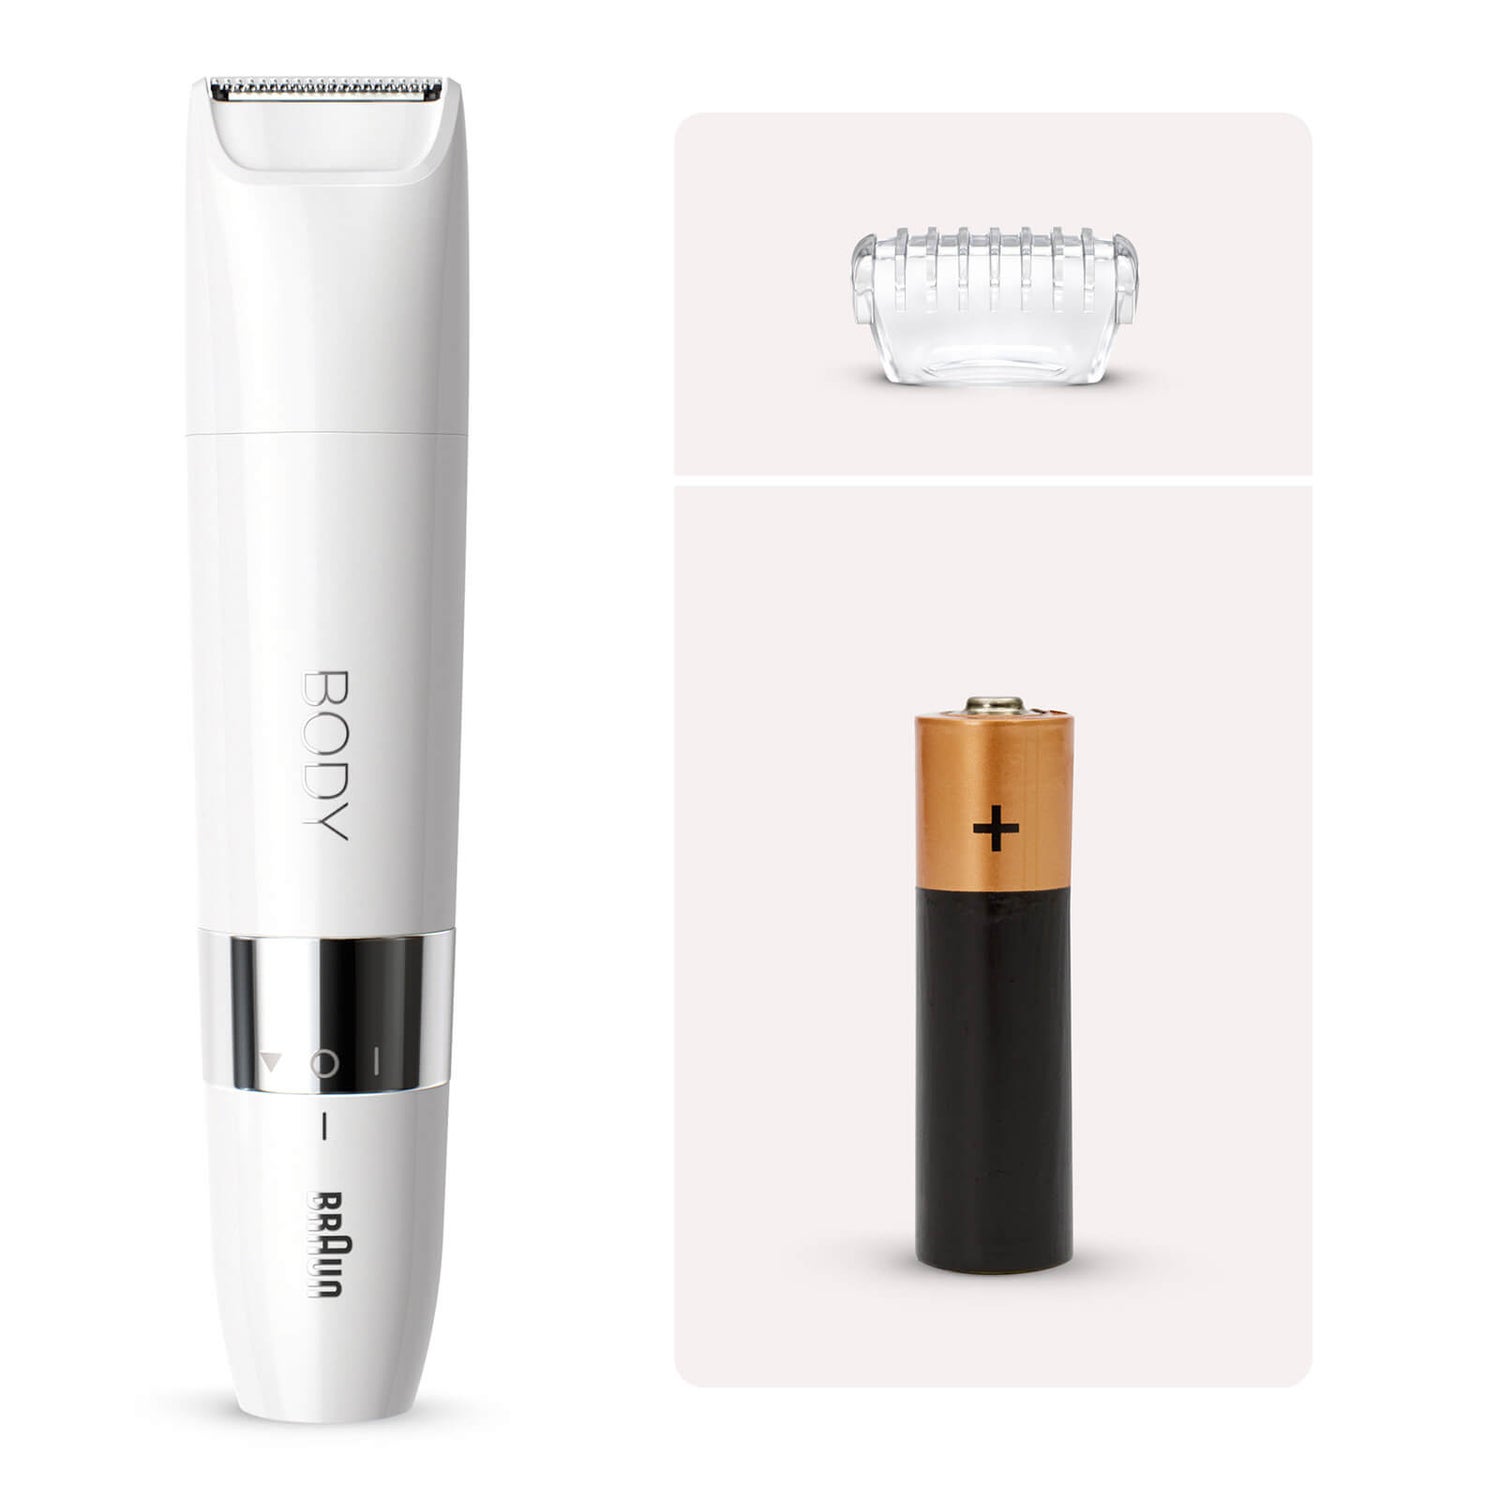 Braun Body Mini Trimmer with Trimming Comb